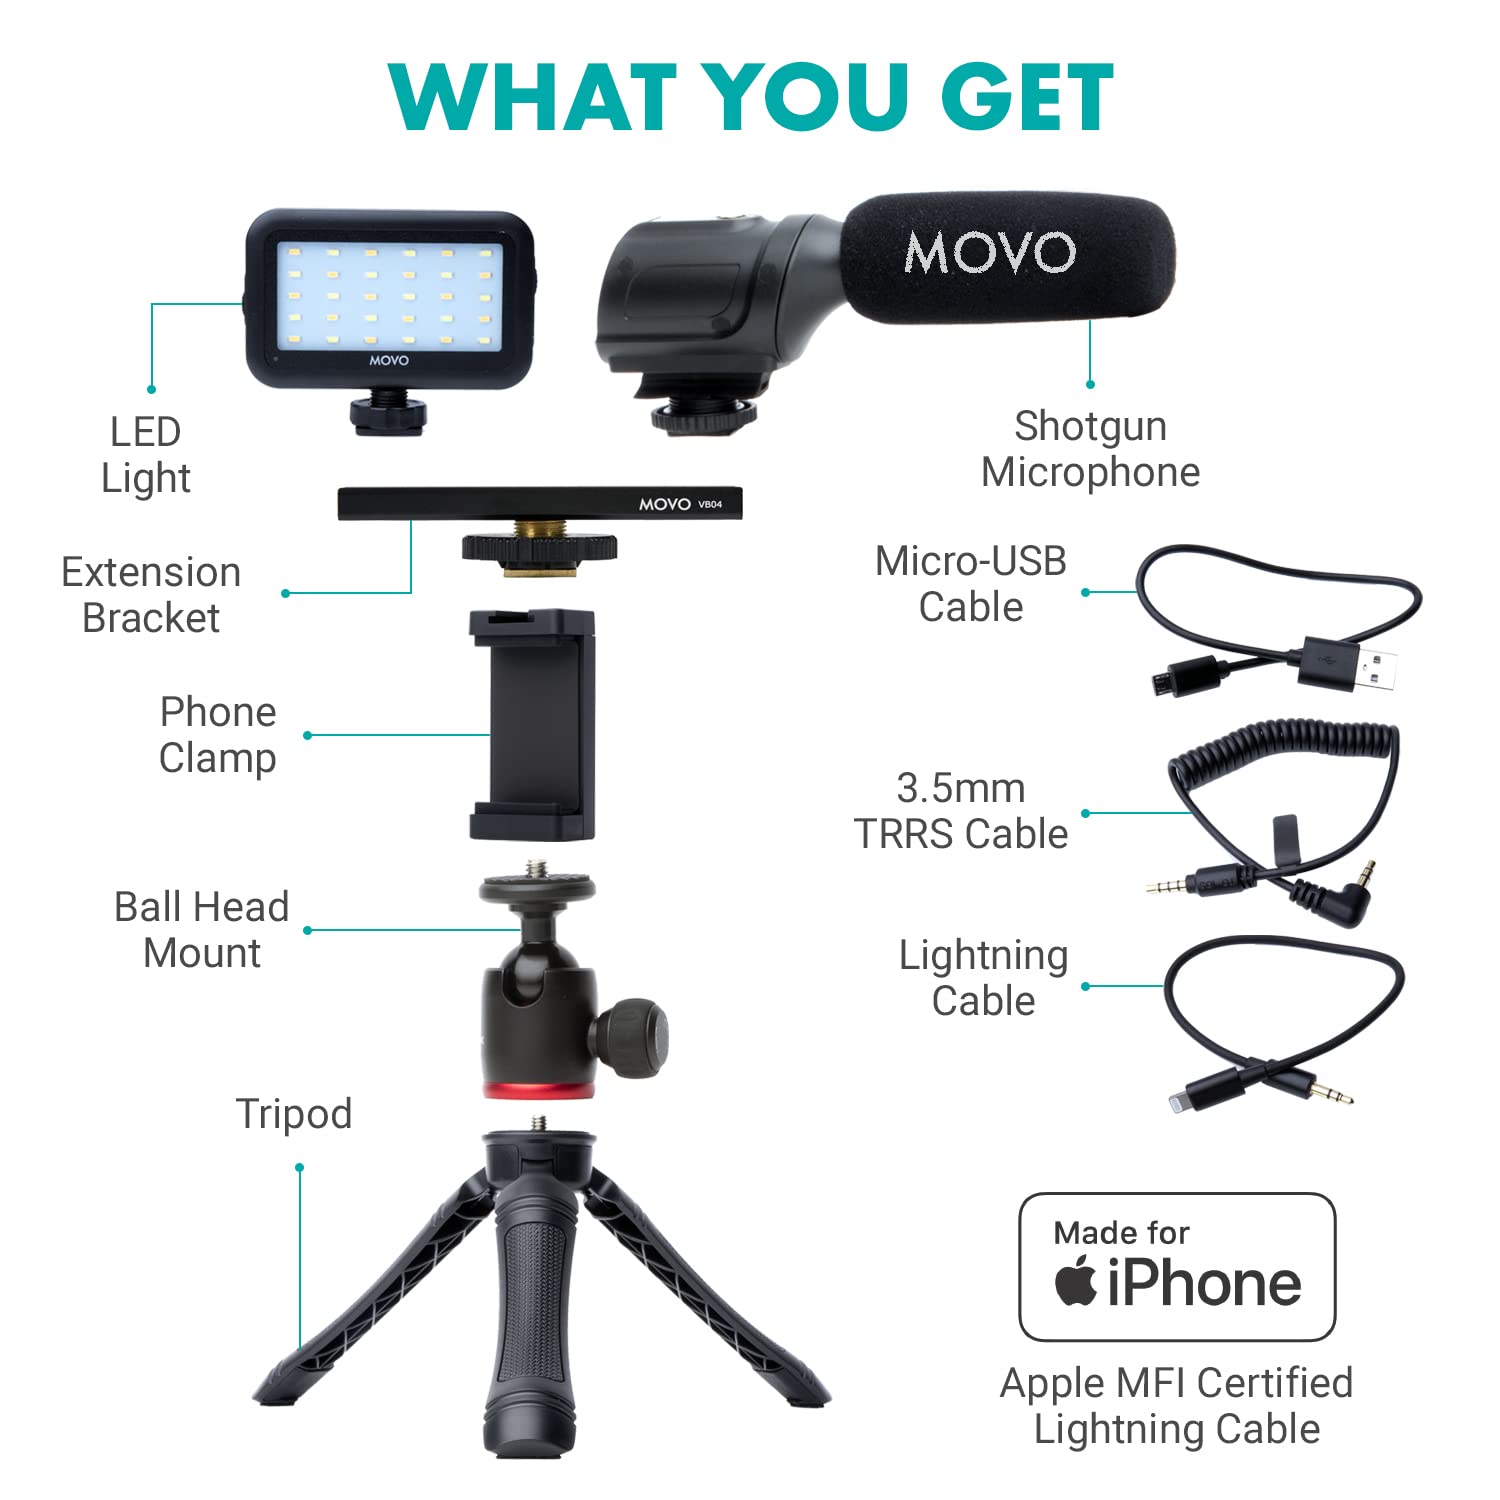 Movo iVlogger Vlogging Kit for iPhone - Lightning Compatible YouTube Starter Kit for Content Creators - Accessories: Phone Tripod, Phone Mount, LED Light and Shotgun Microphone  - Acceptable